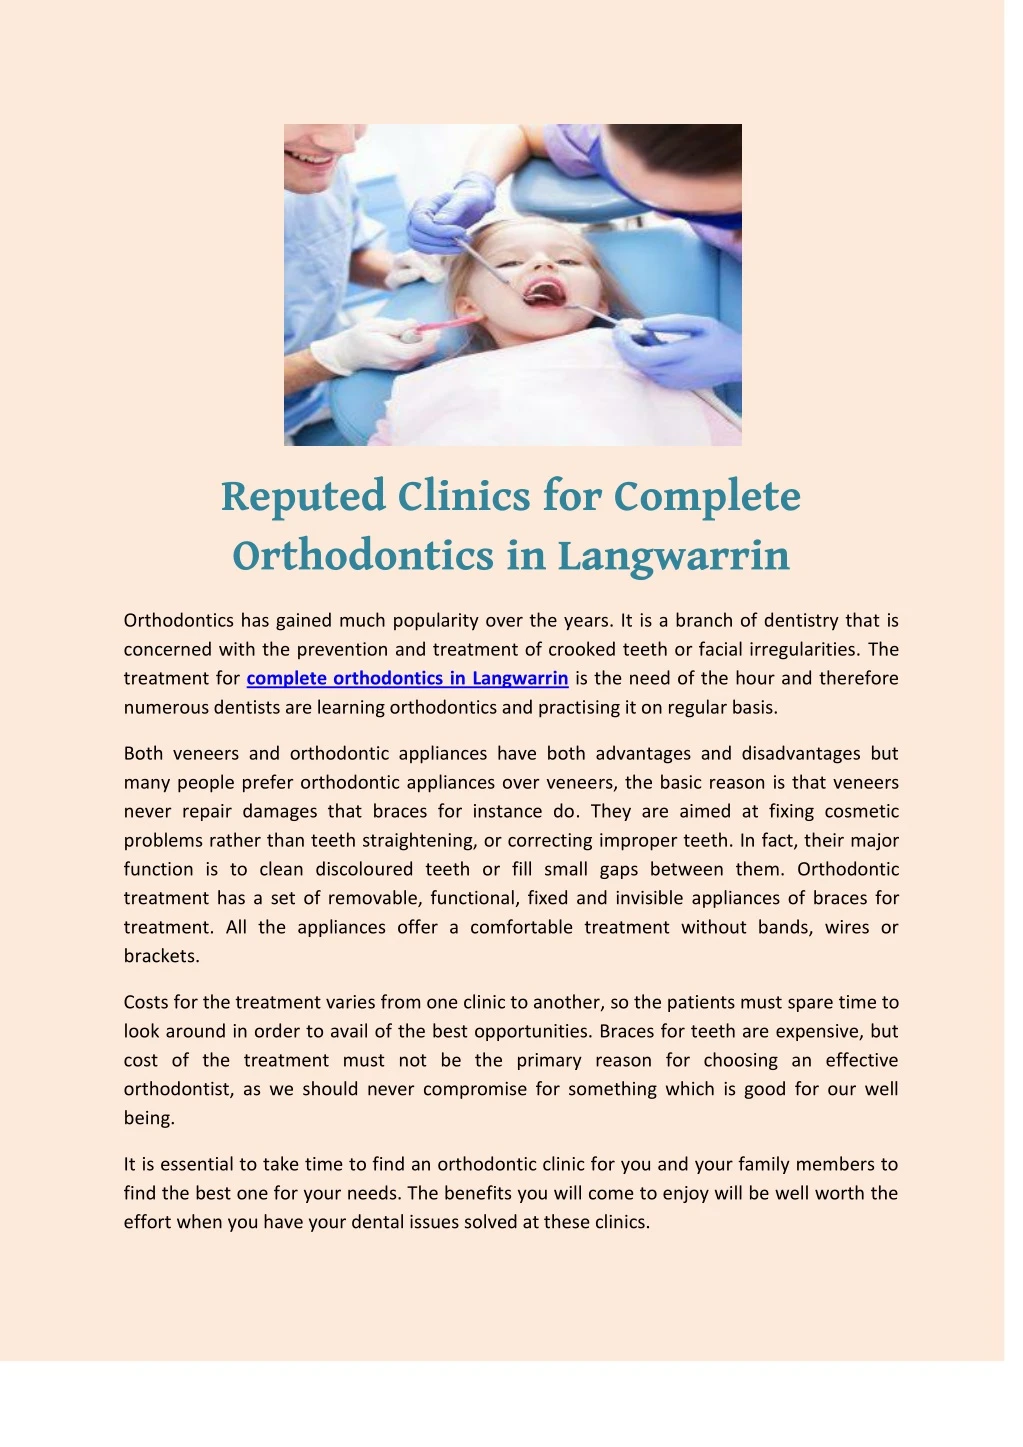 reputed clinics for complete orthodontics